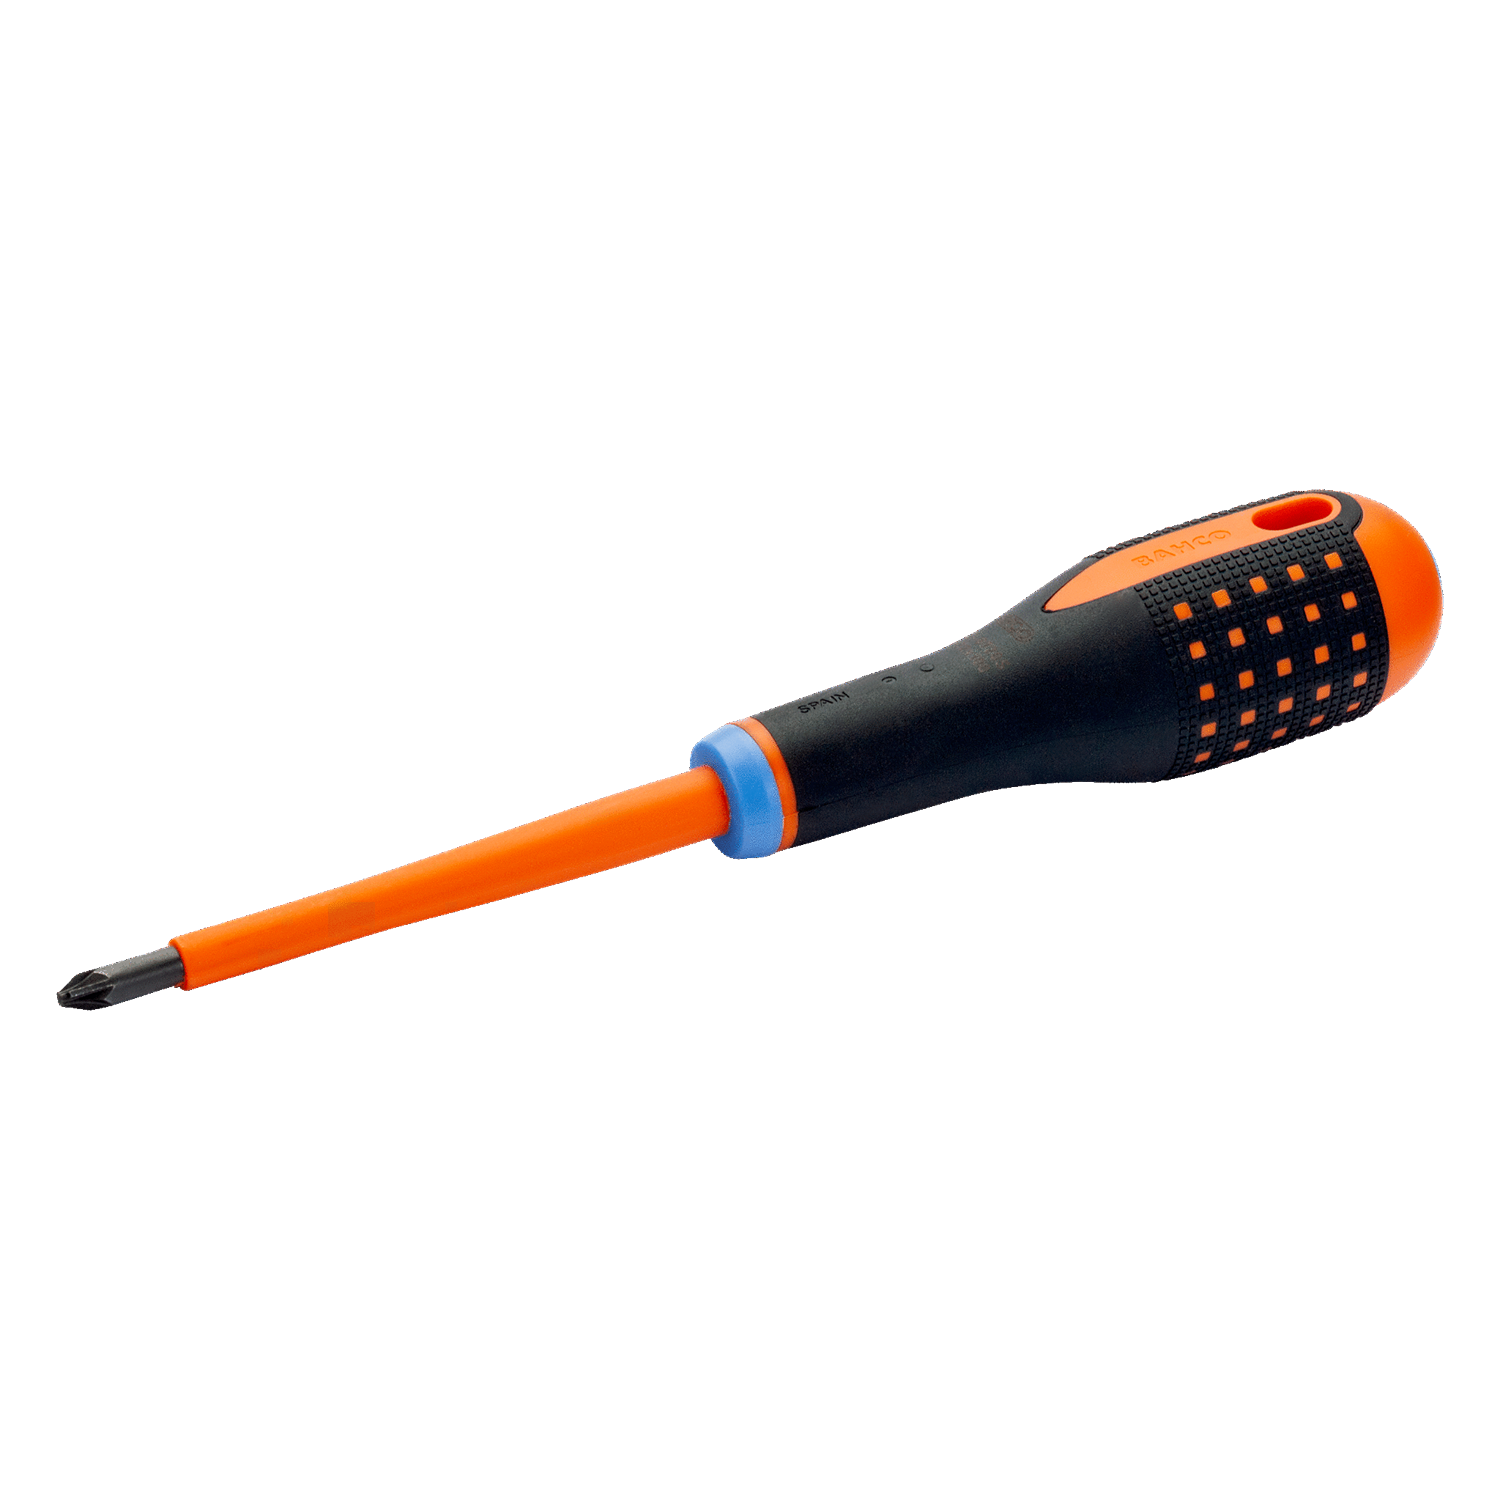 BAHCO BE-8710S - BE-8720S ERGO VDE Insulated Pozidriv Screwdriver - Premium Pozidriv Screwdriver from BAHCO - Shop now at Yew Aik.